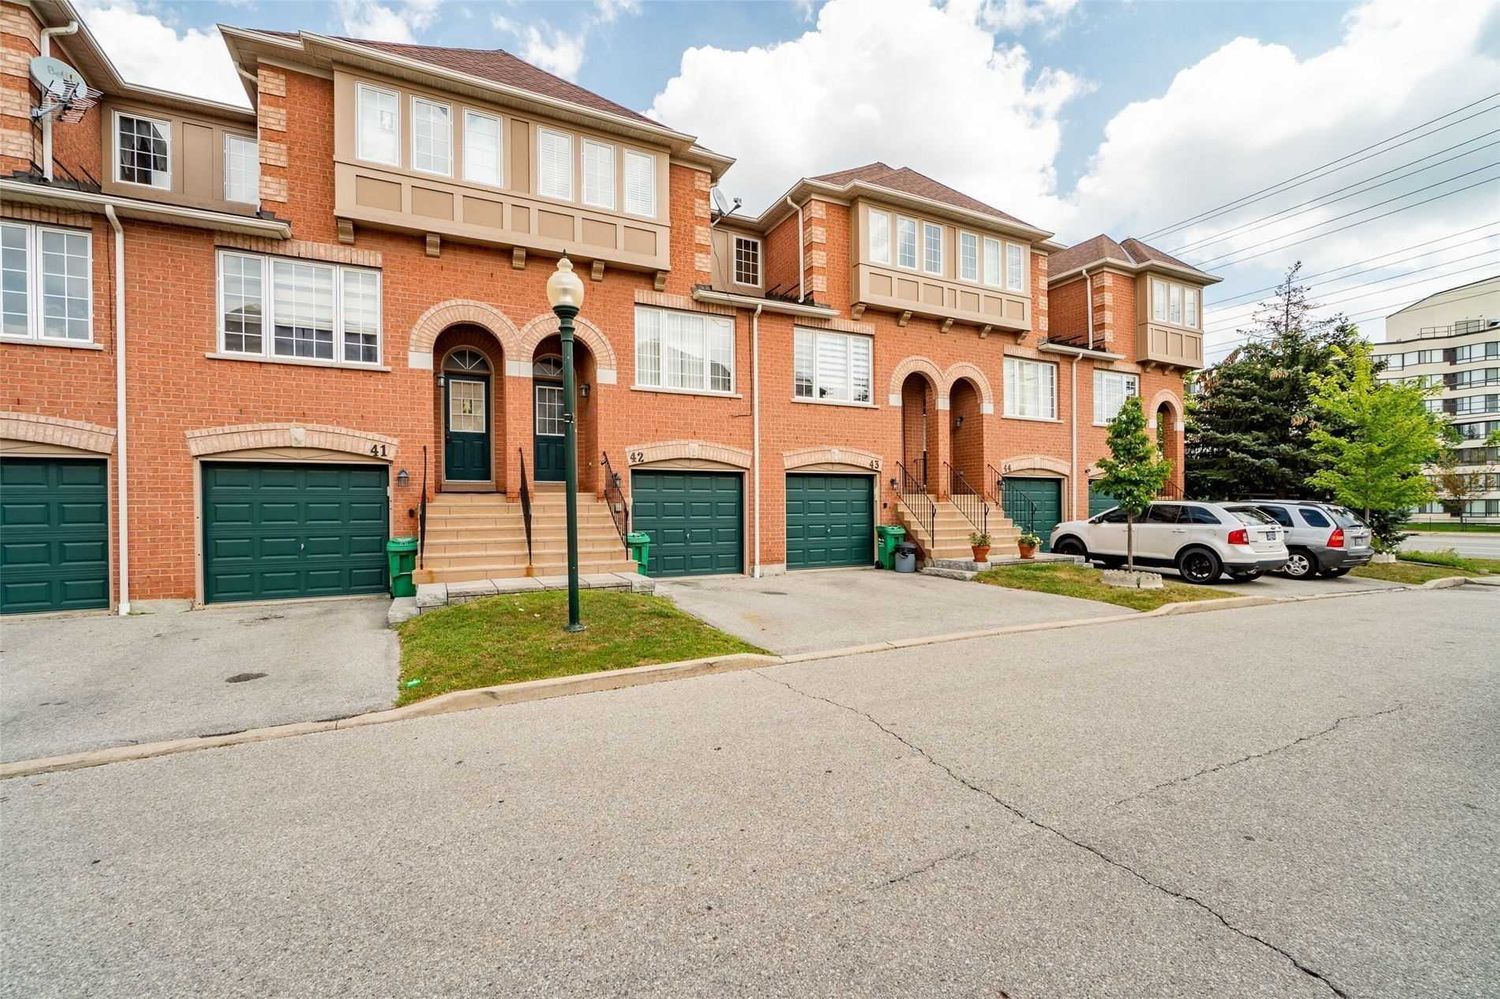 3020 Cedarglen Gate. Cedarglen Gate Townhomes is located in  Mississauga, Toronto - image #2 of 2